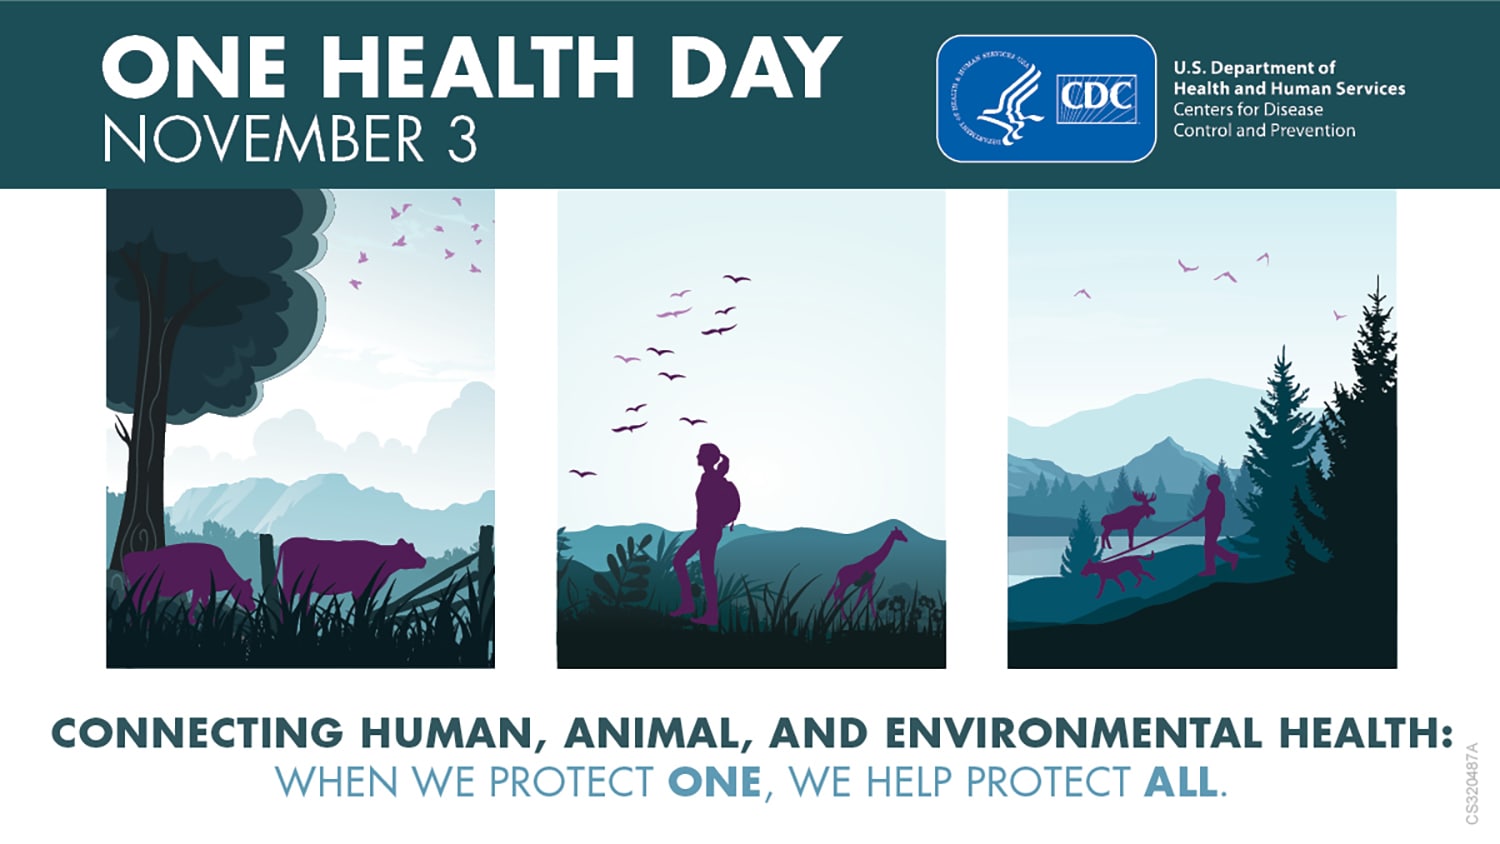 Illustration of a landscape with animals and people interacting in outdoor environments. Text reads: One Health Day November 3 Connecting human, animal, and environmental health: when we protect one, we protect all.